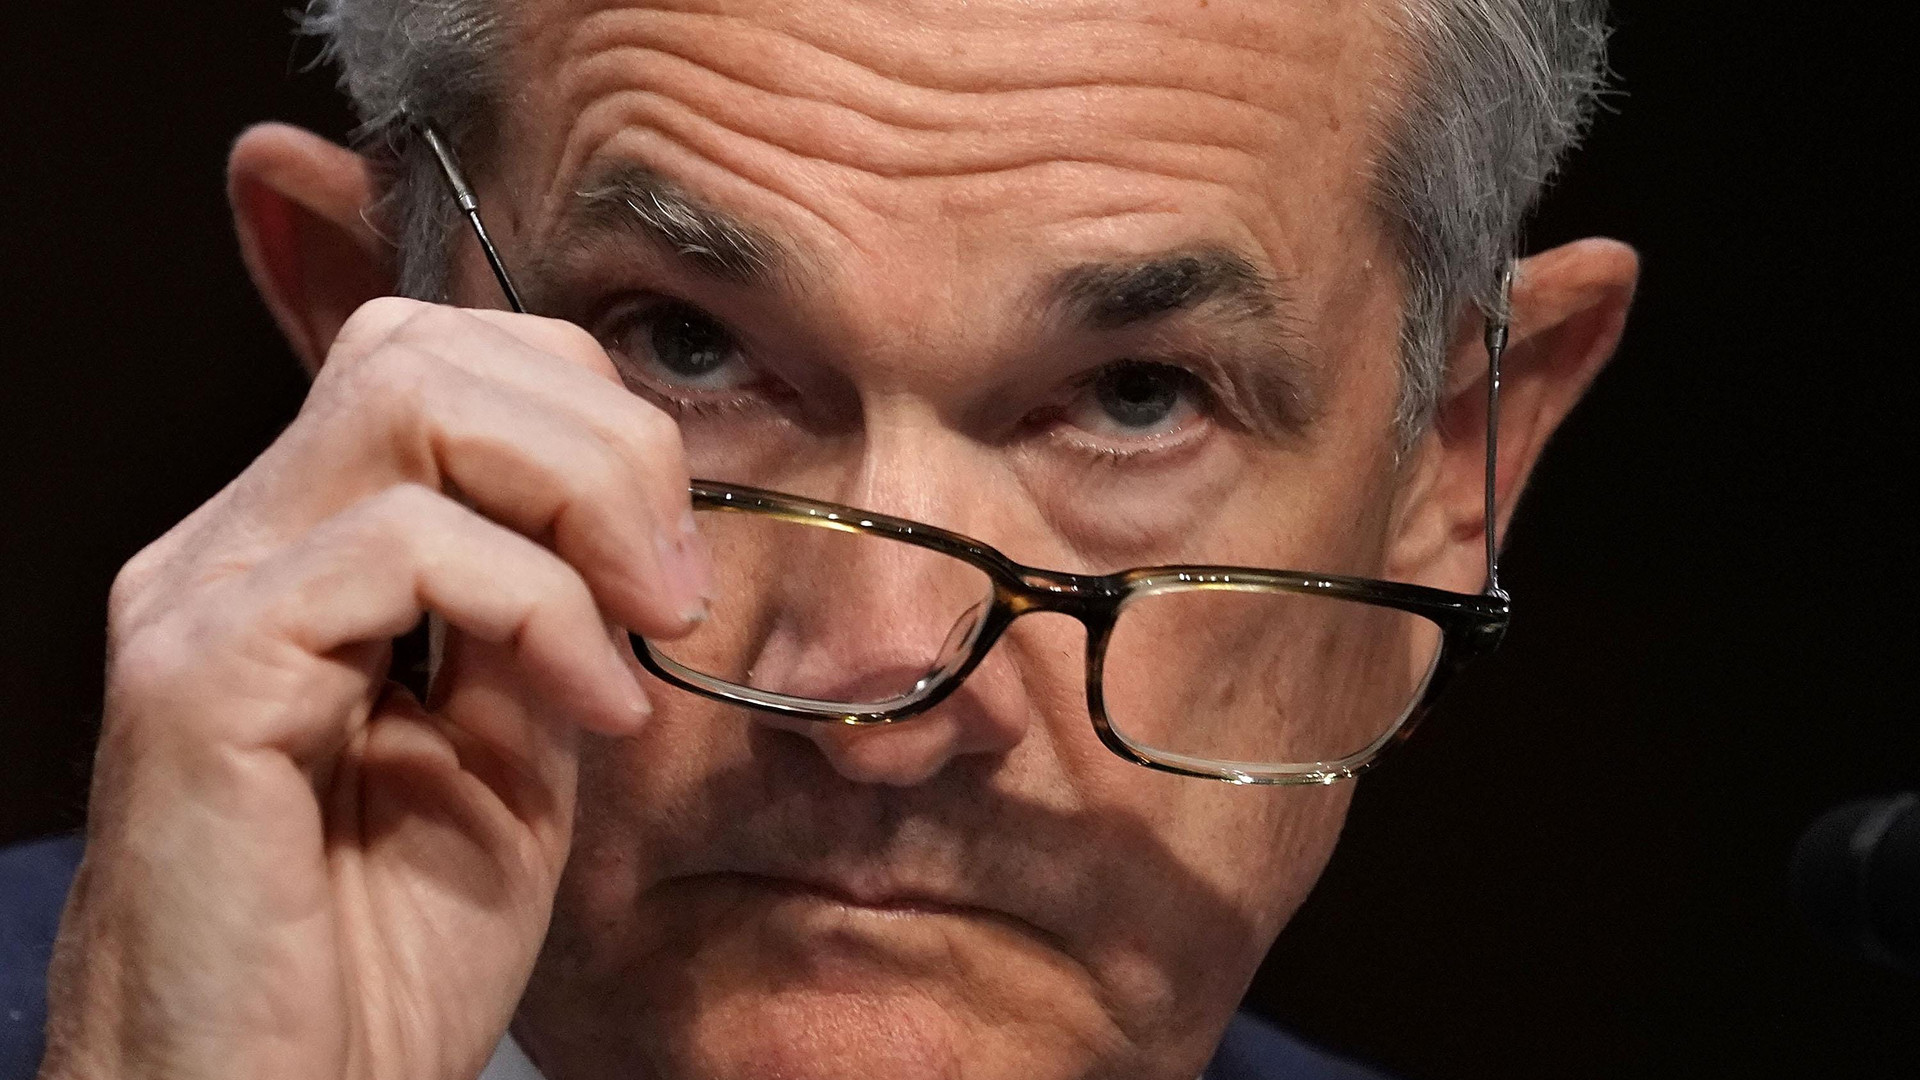 Inflation Rate Spikes As Retail Workers Quit And Chairman Powell Deflects